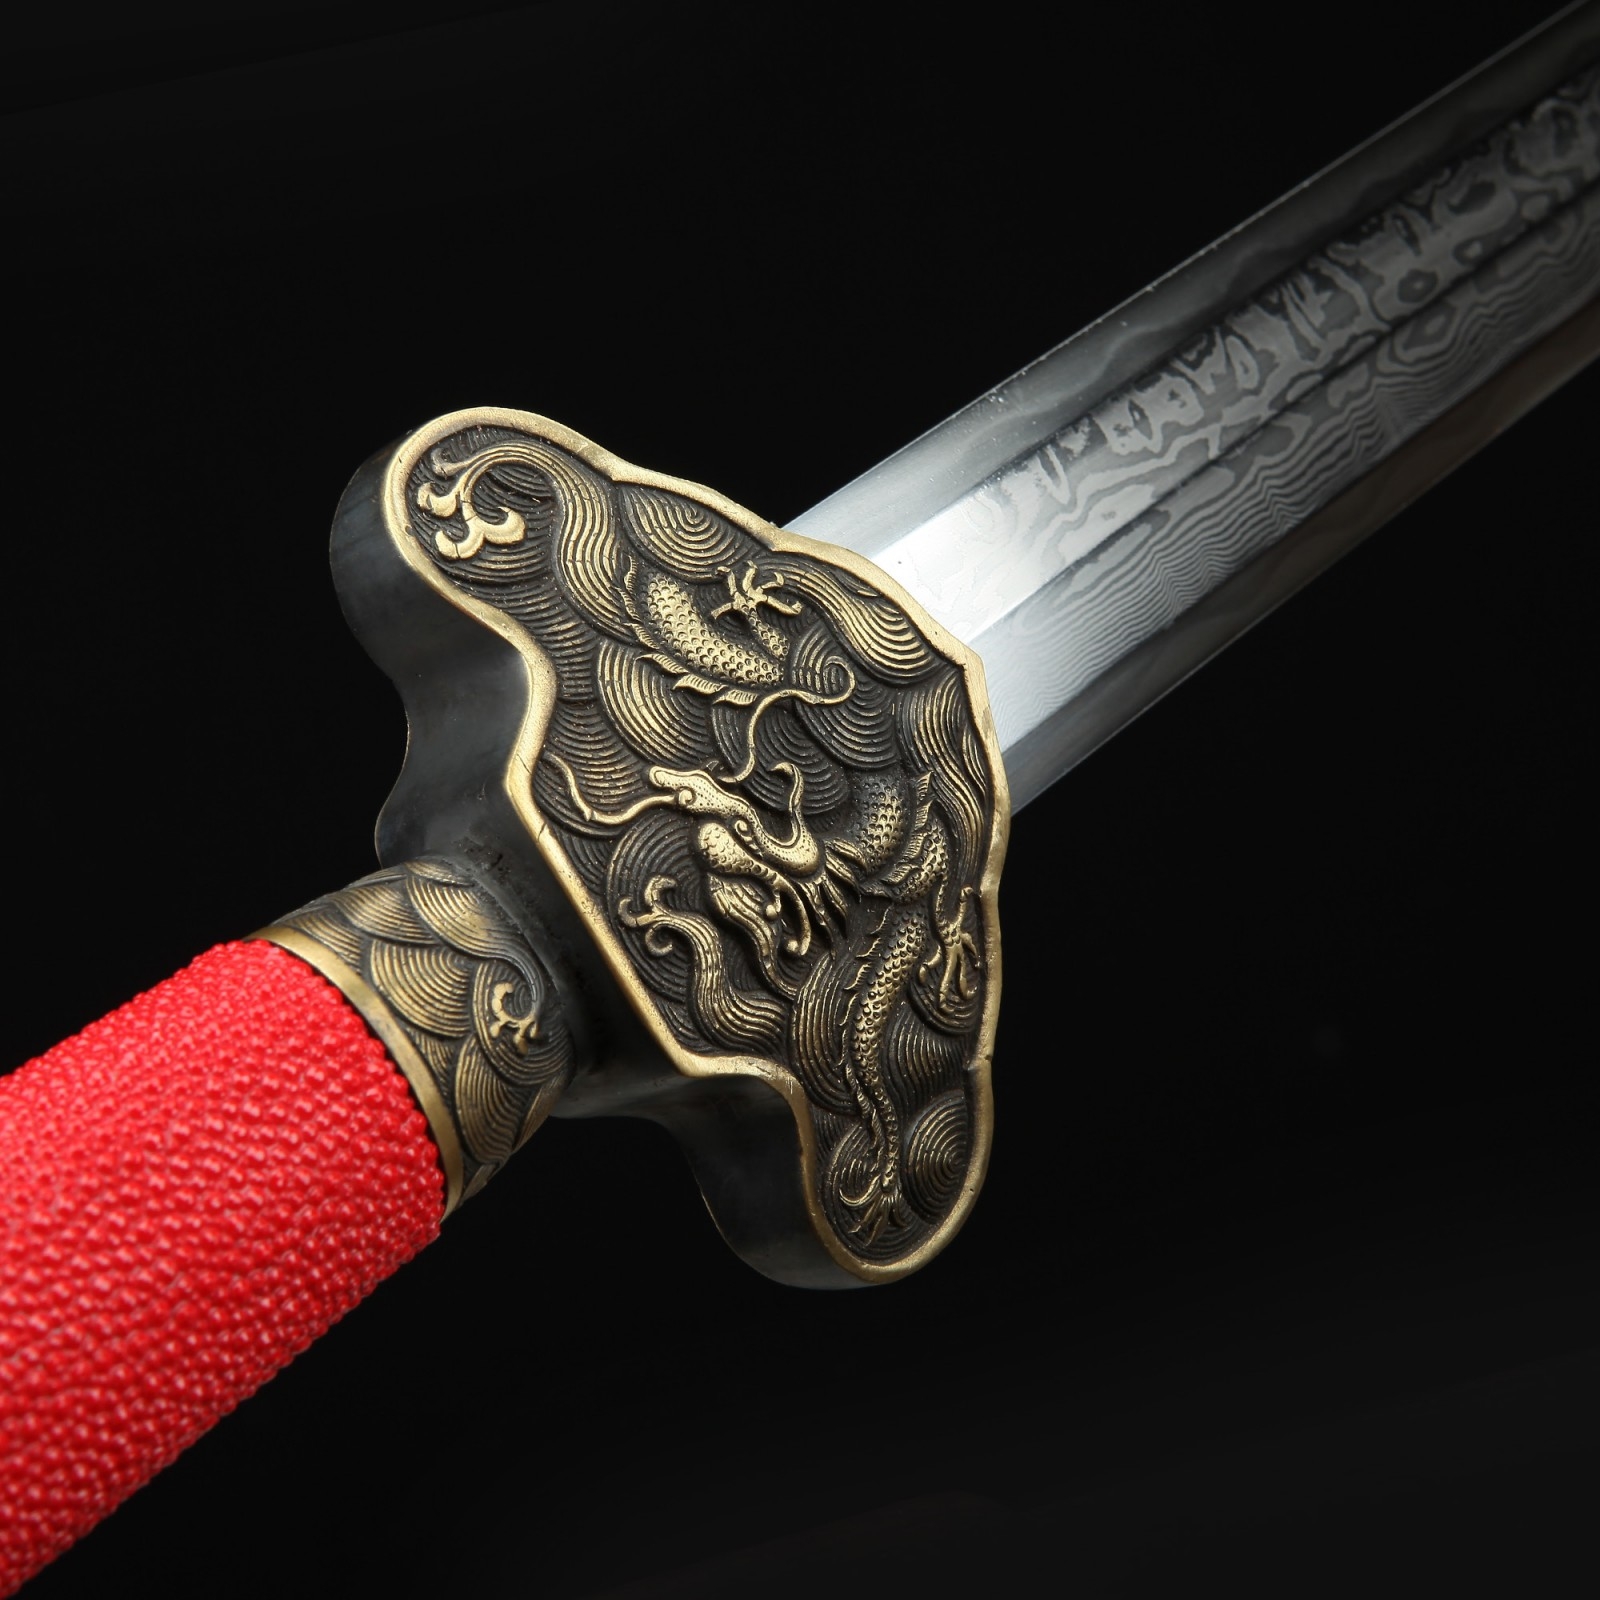 Song Dynasty Sword | Red Rayskin Chinese Dragon Theme Damascus Steel ...